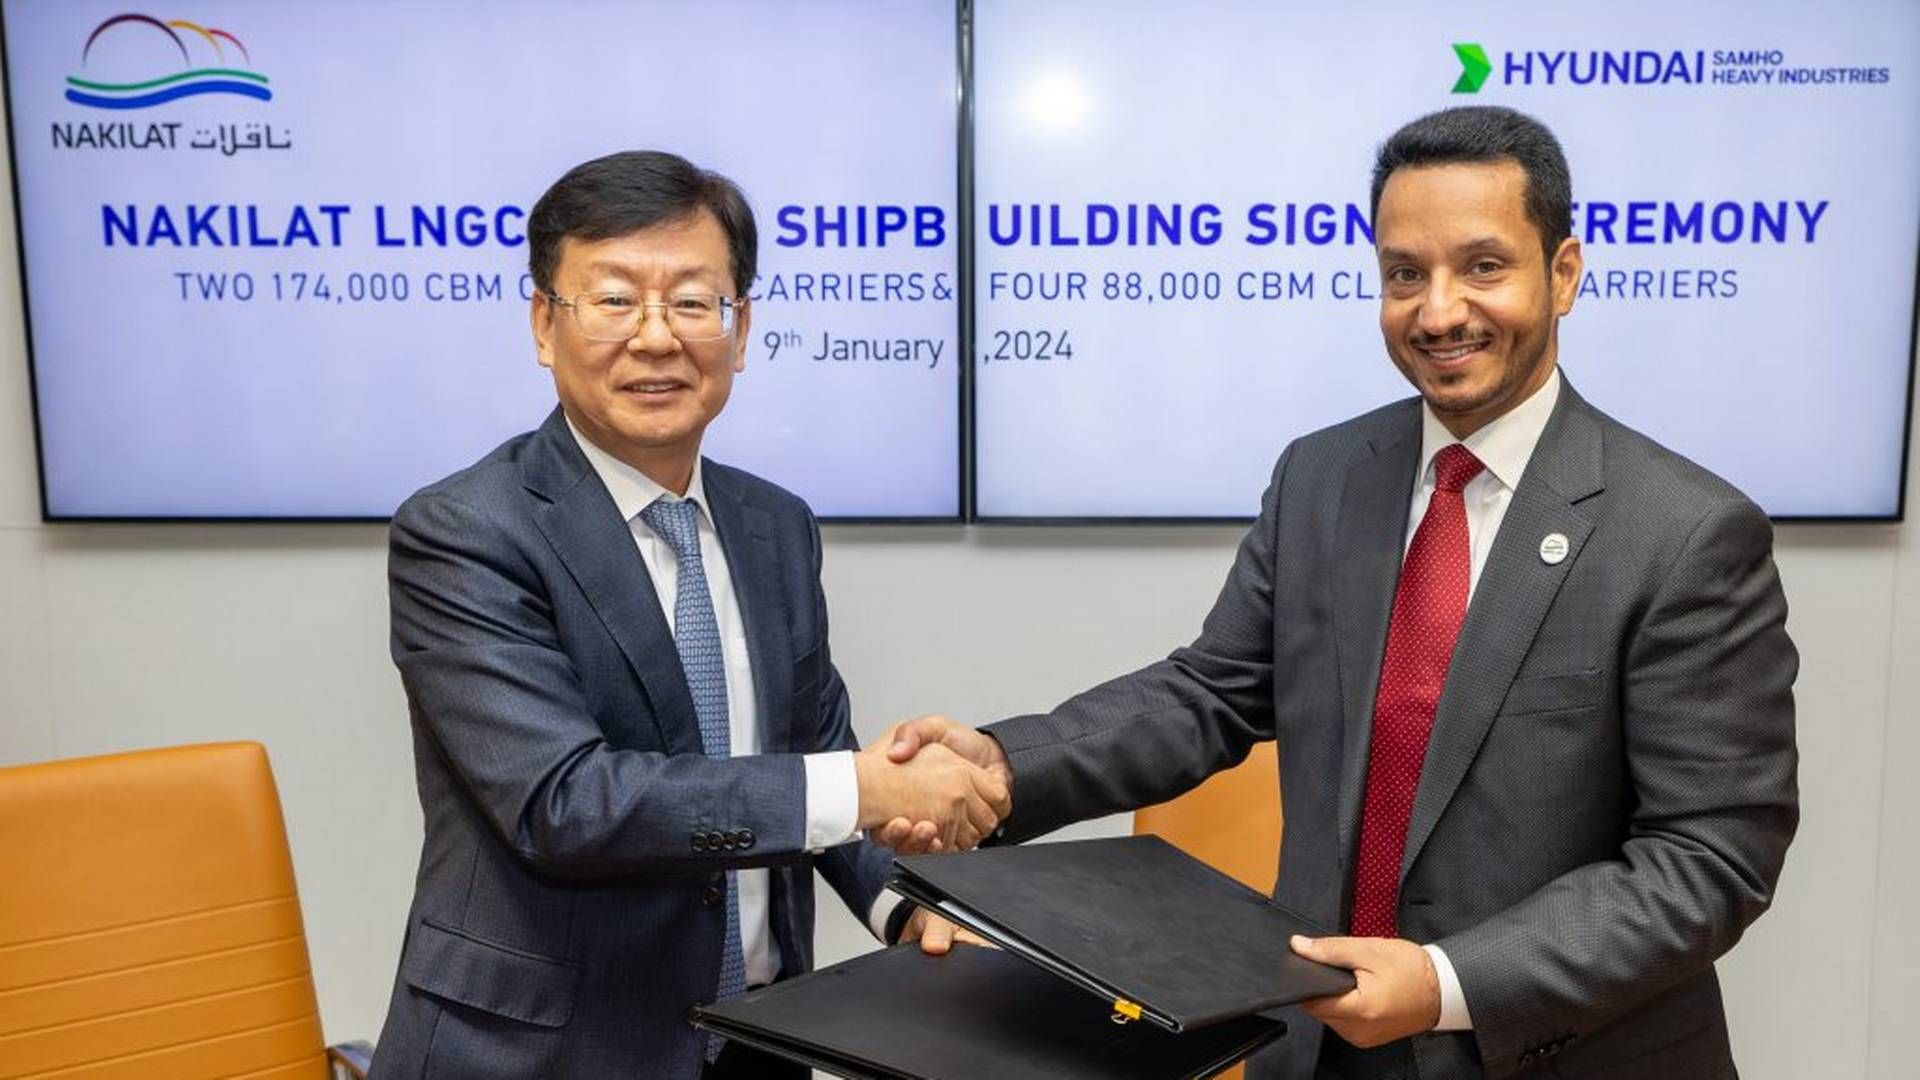 The South Korean shipyard will provide Nakilat with six new vessels in 2026 or 2027. It is not yet known when the 25 ships ordered this week will be delivered. | Photo: Nakilat